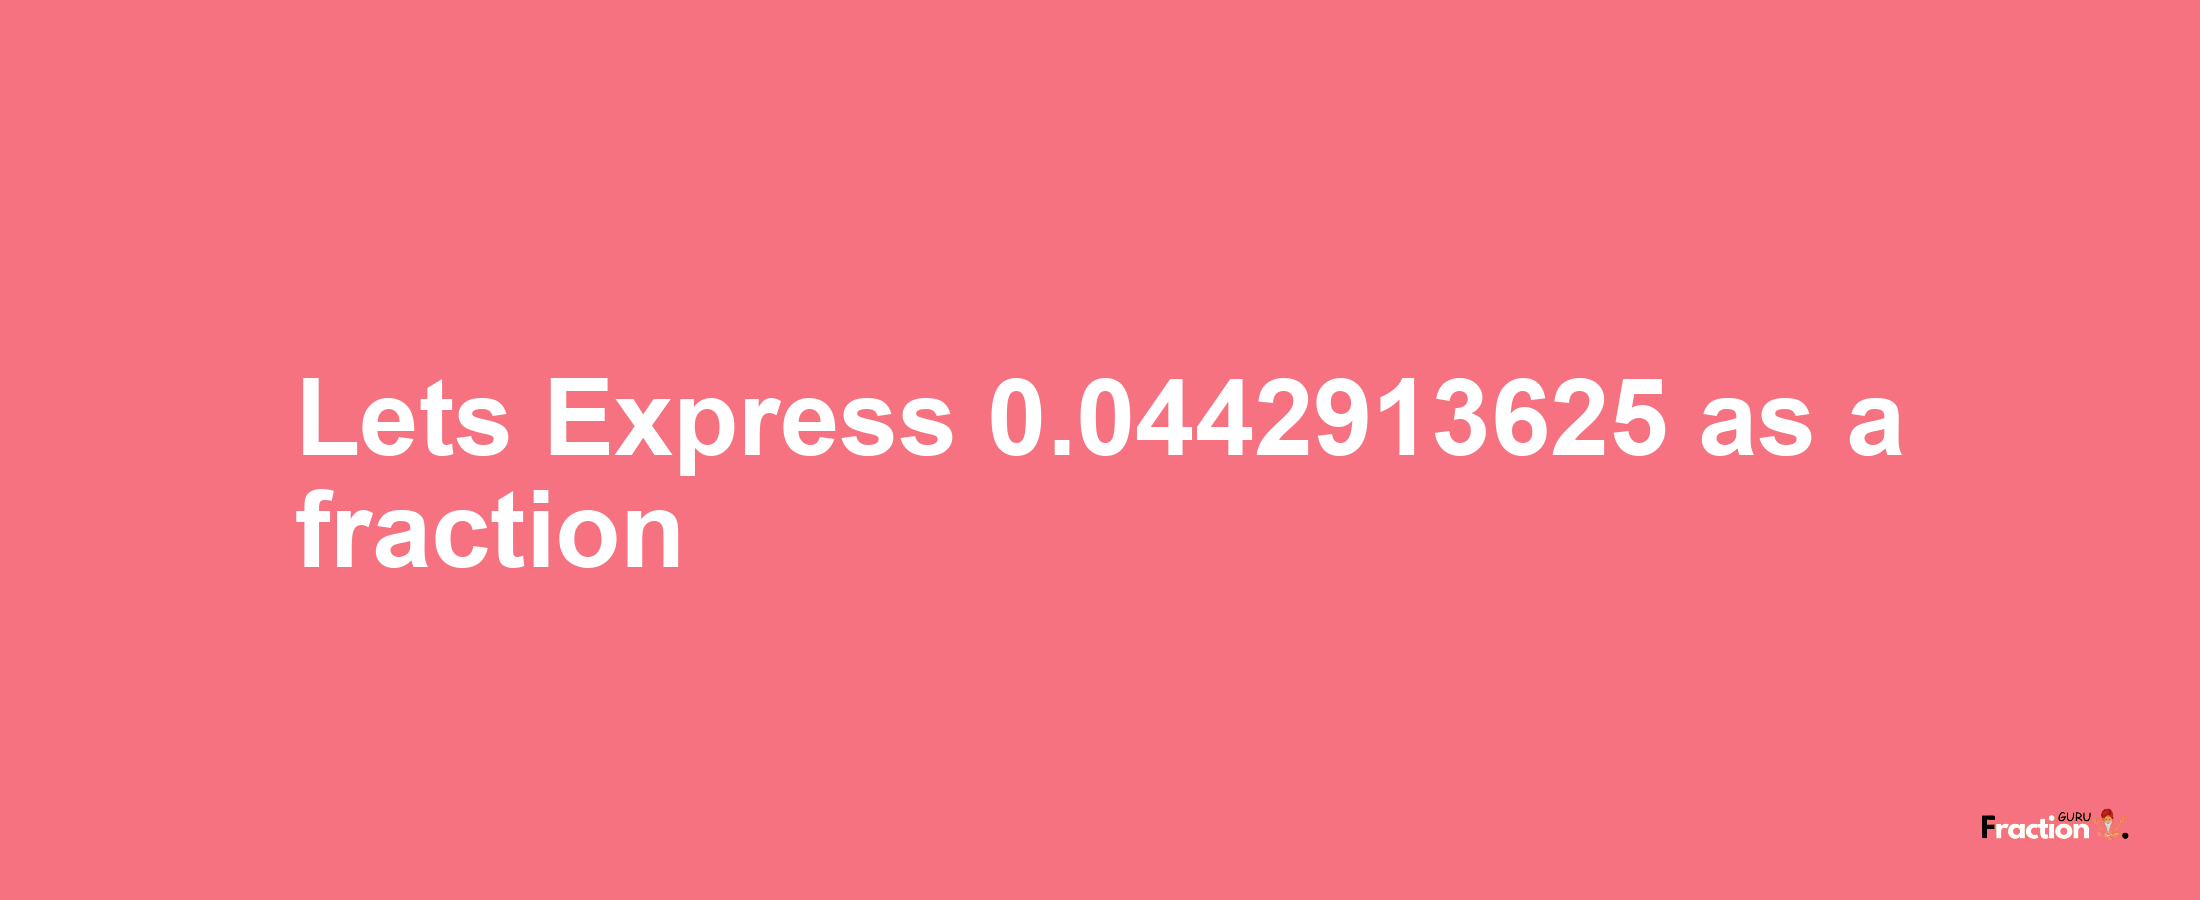 Lets Express 0.0442913625 as afraction